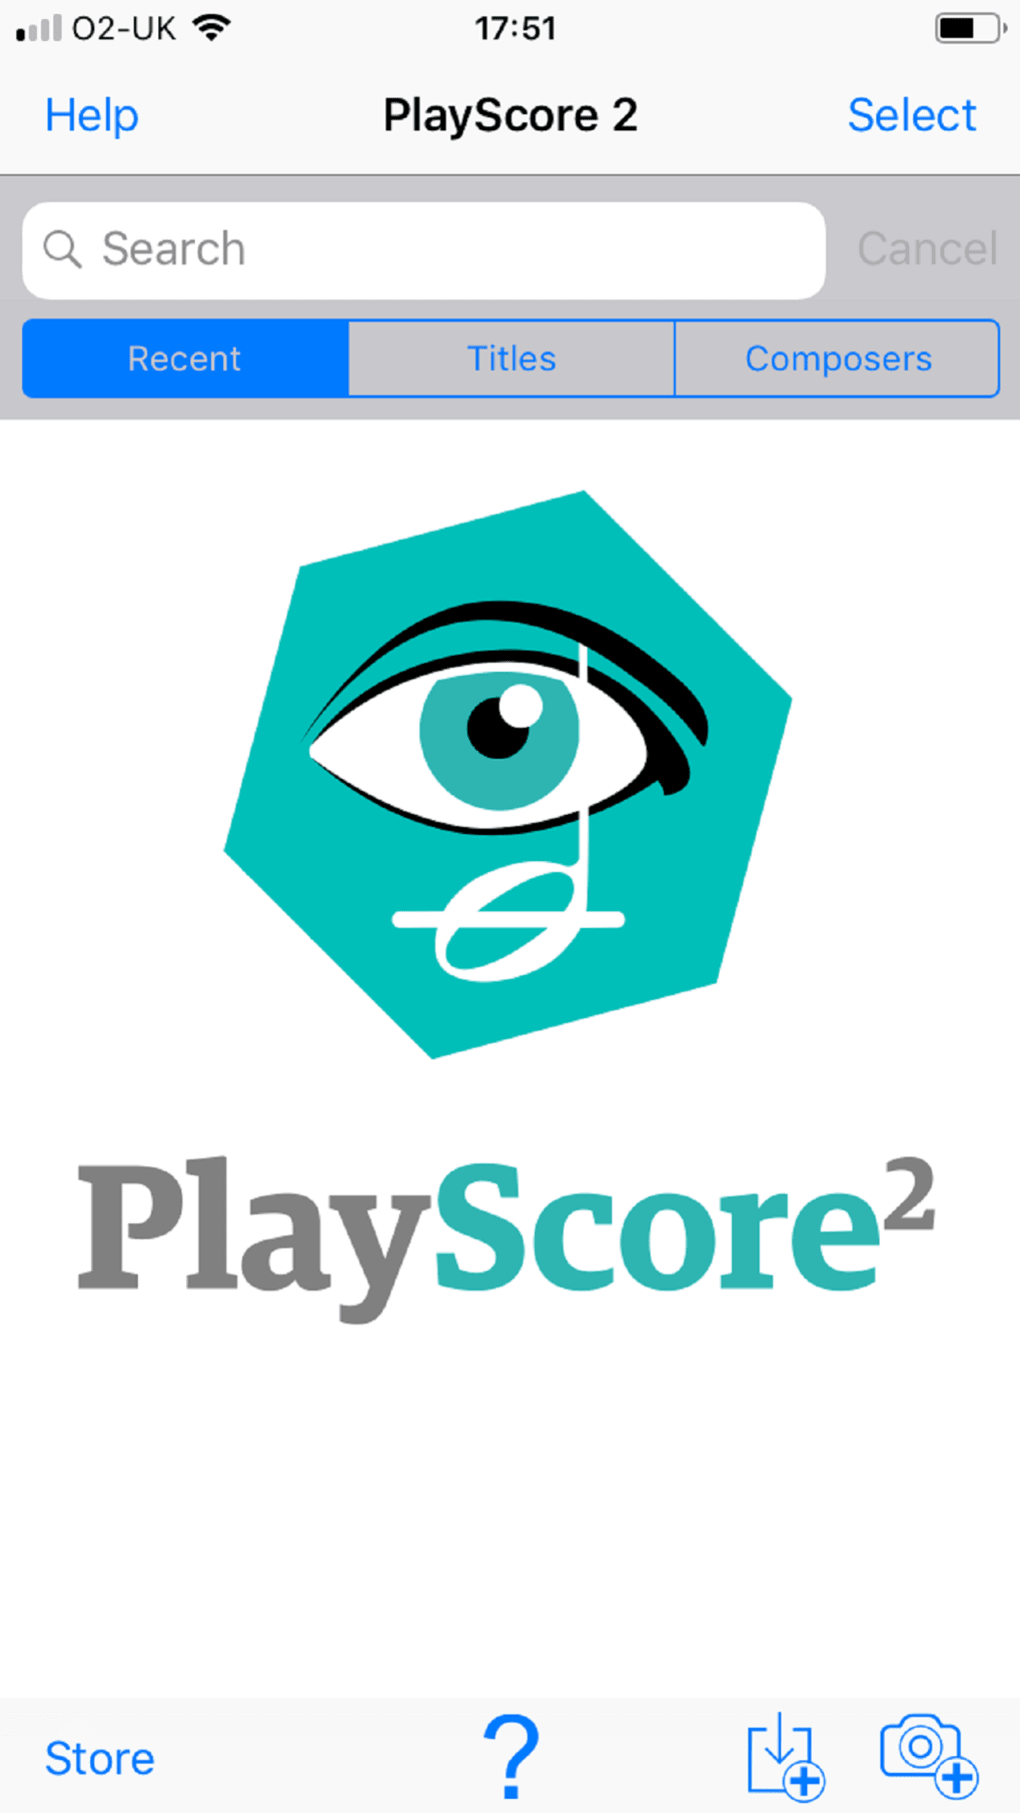 5 score-keeping apps, reviewed